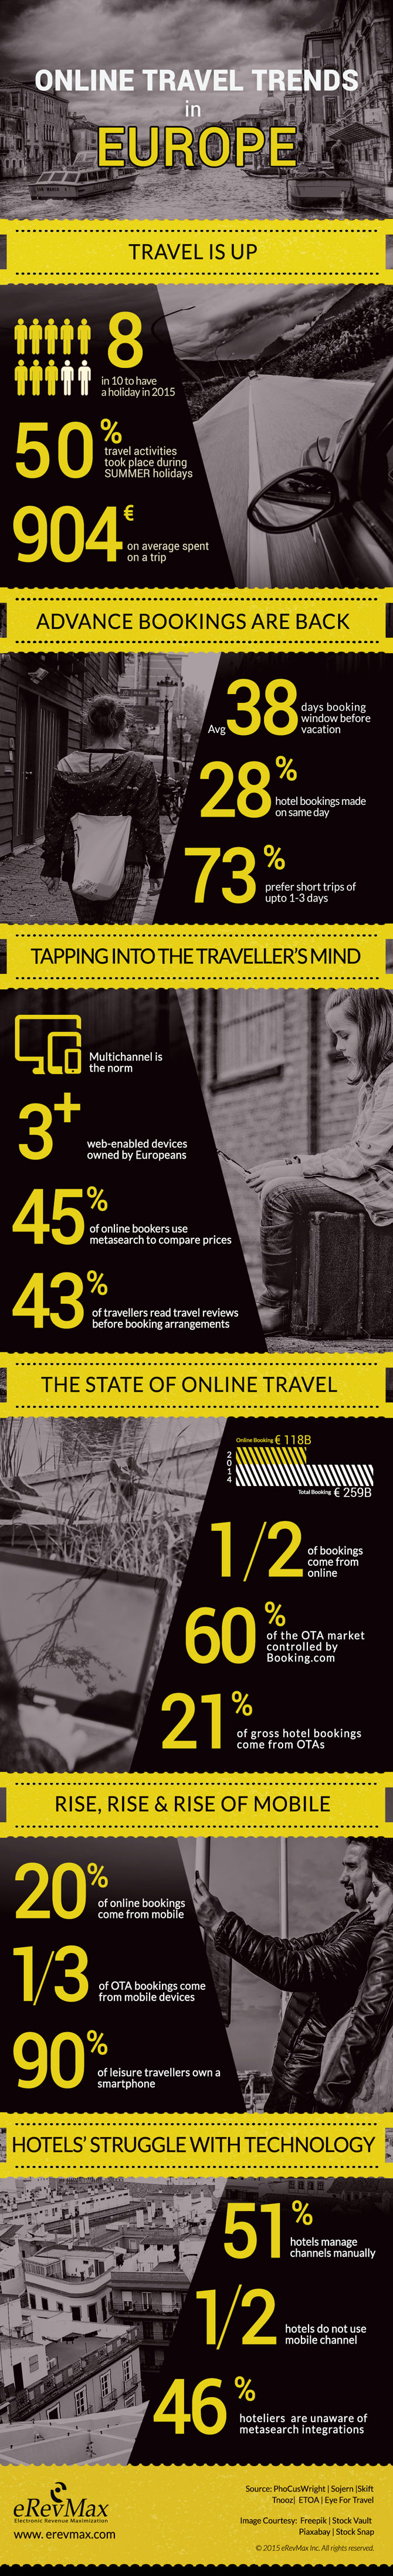 Infographic Travel Trends Europe